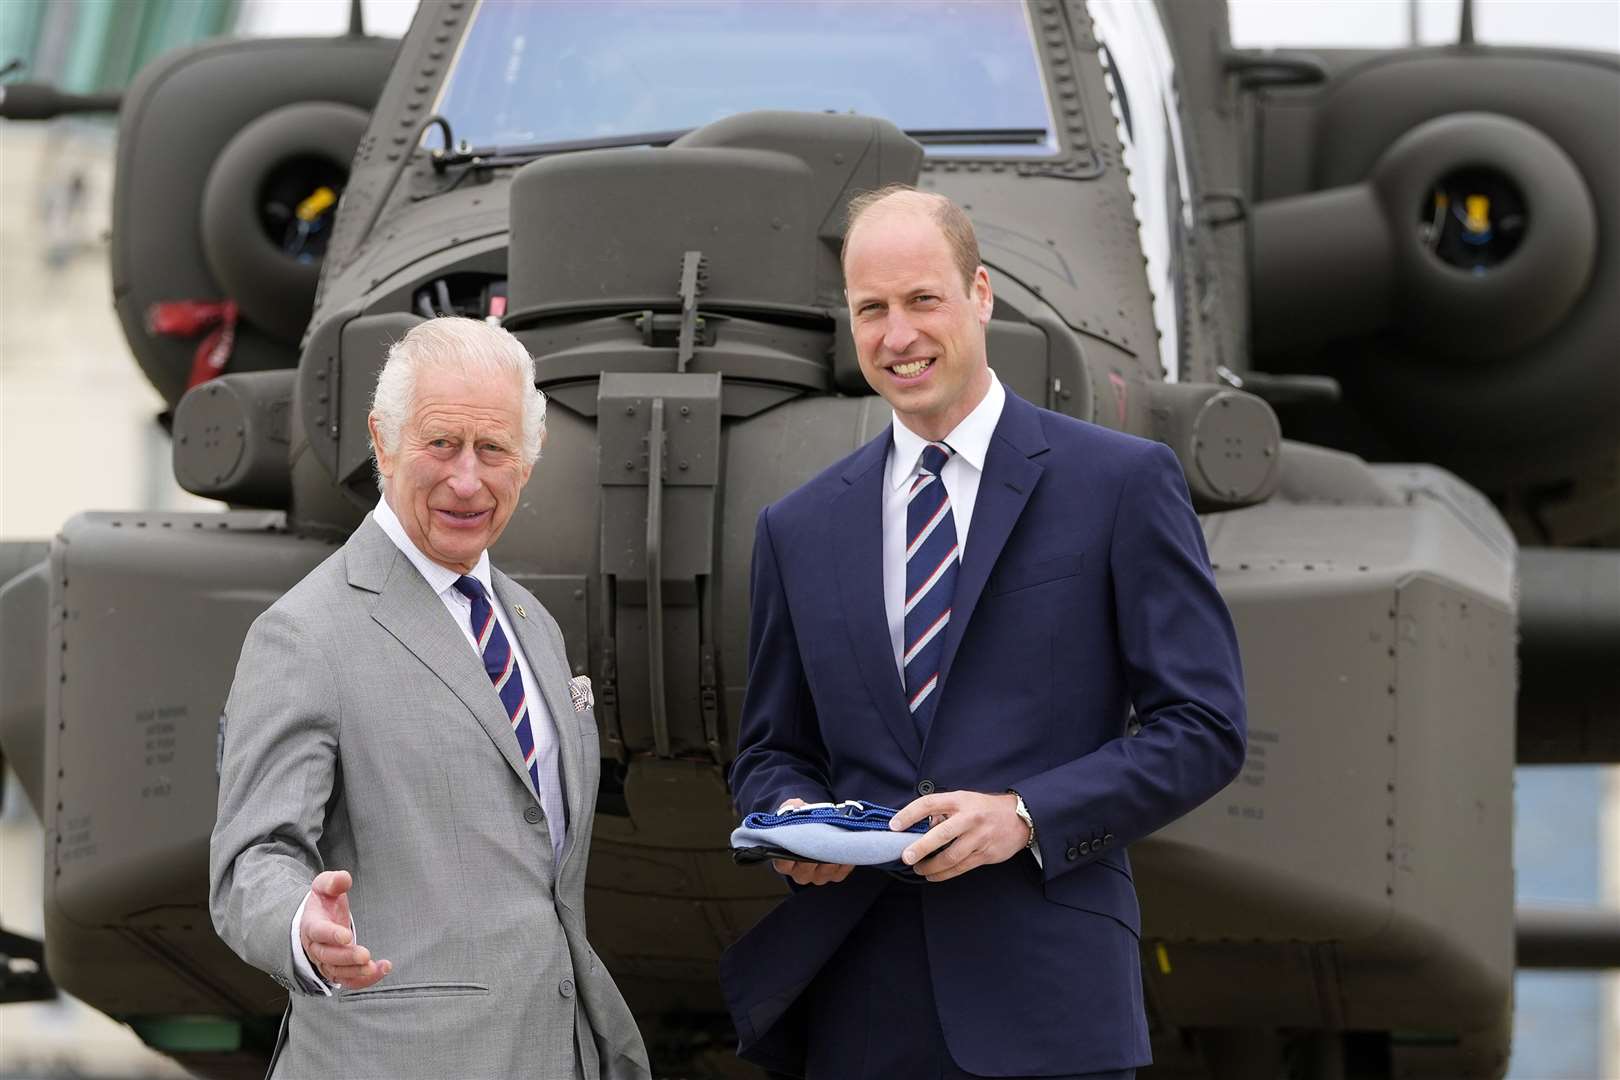 Charles handed over the role of Colonel-in-Chief of the Army Air Corps to William earlier this week (Kin Cheung/PA)